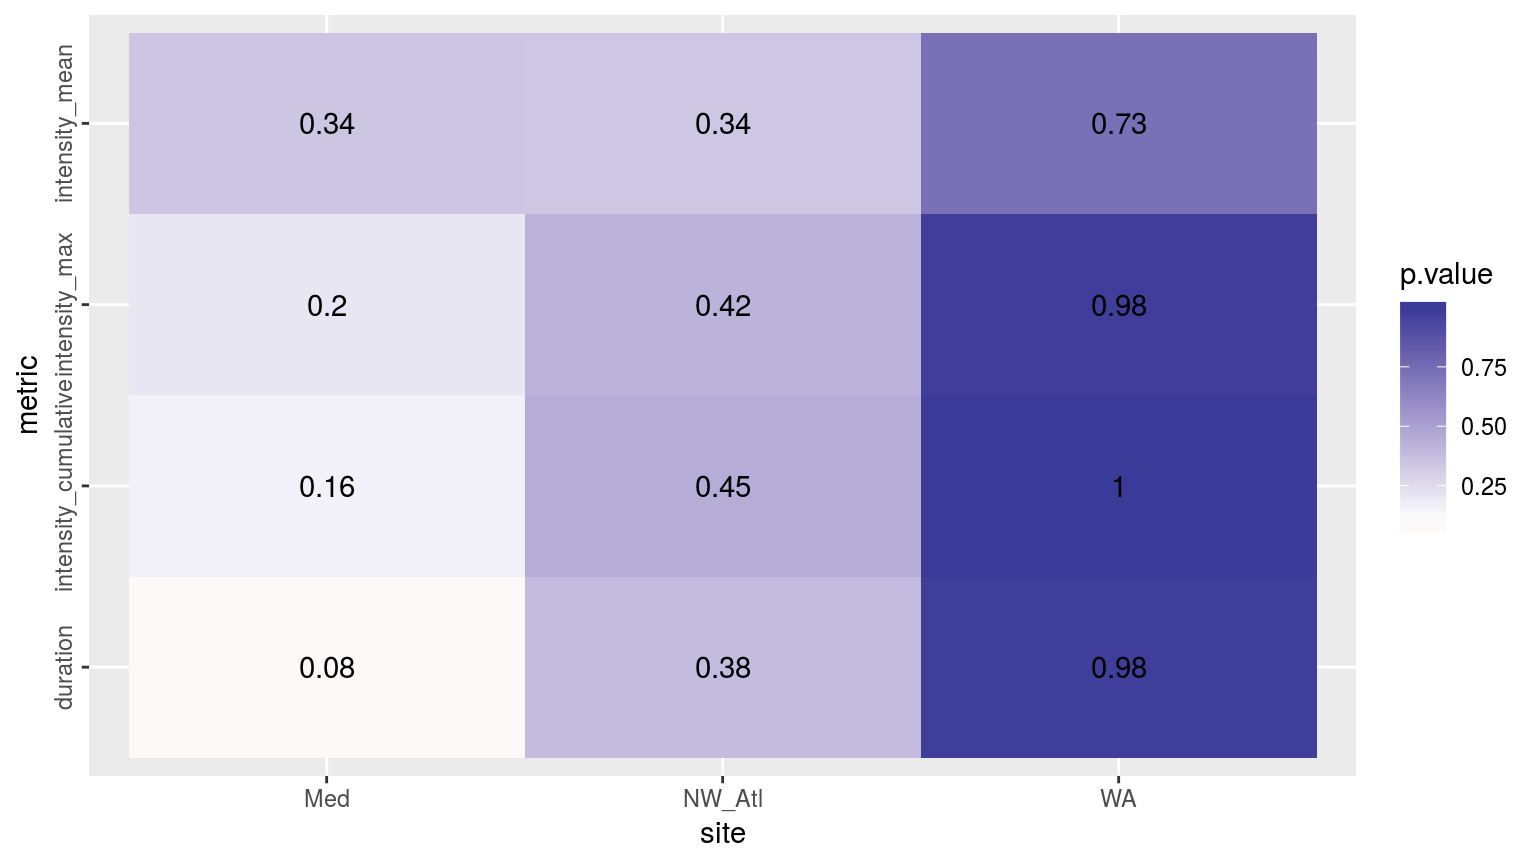 Heatmap showing the ANOVA results for the comparisons of the main four MHW metrics for the three different time periods. There are no significant differences.